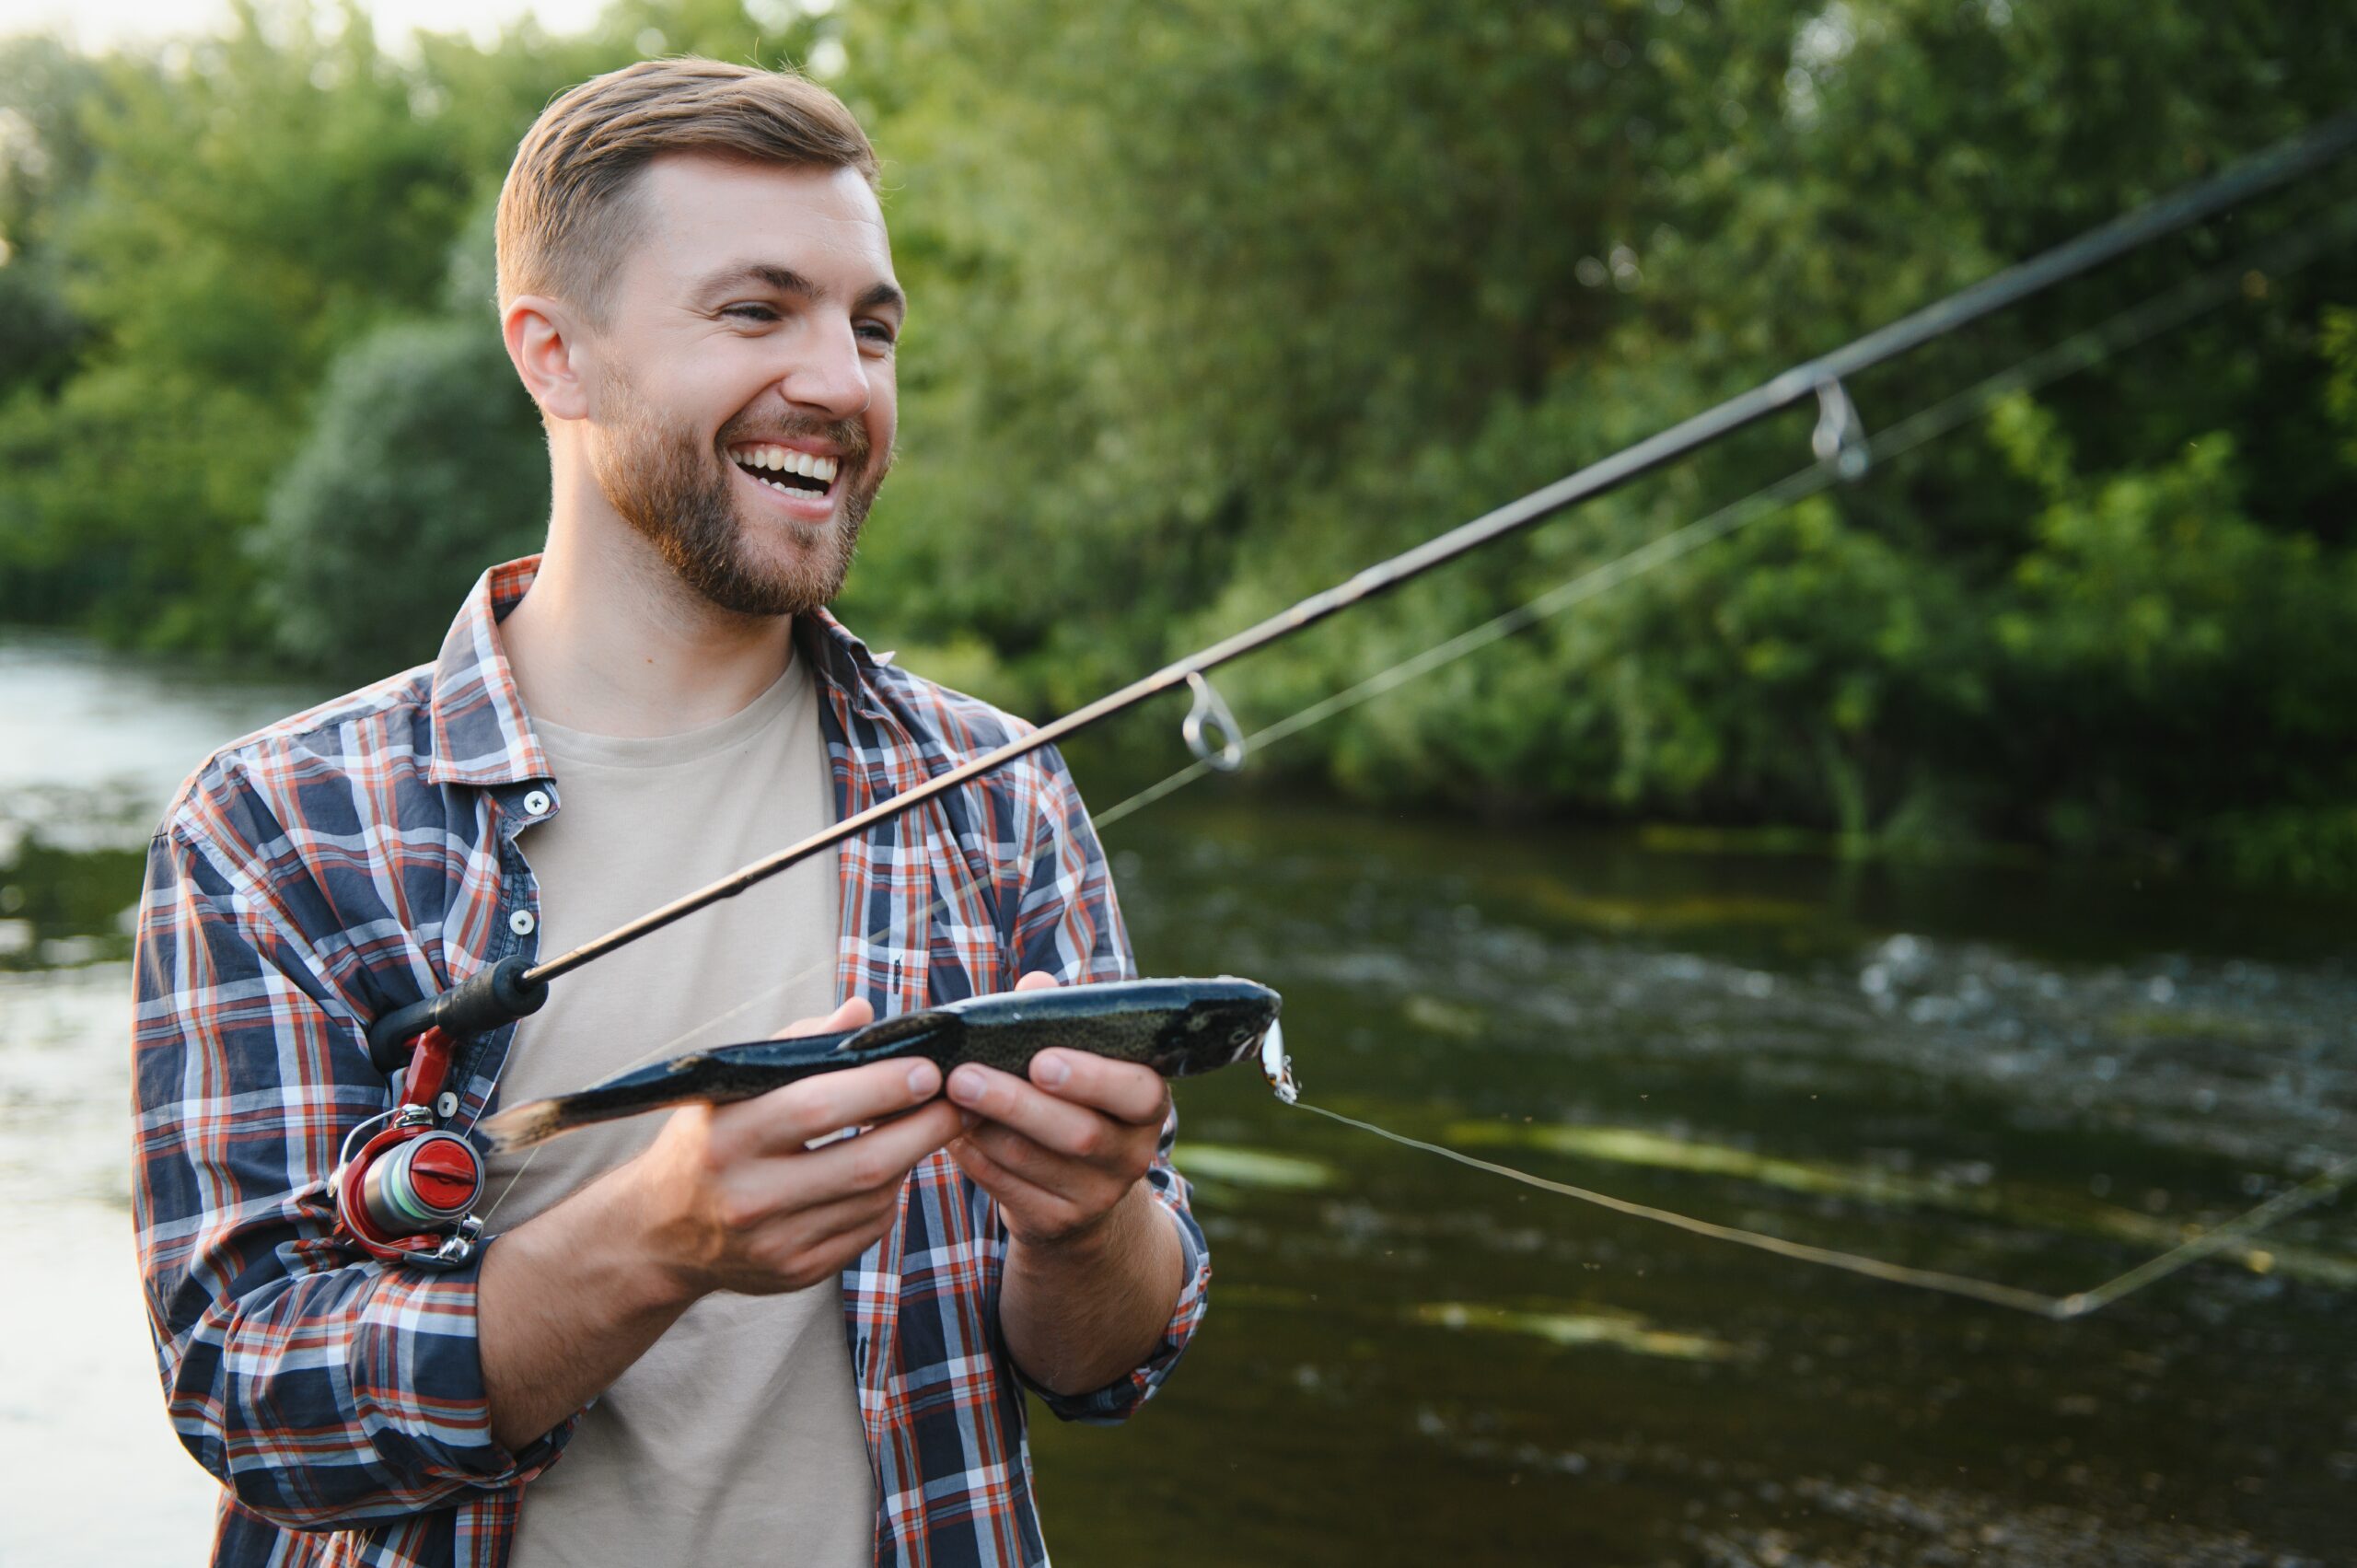 fanatic4fishing.com : What kind of fishing rod should a beginner get?